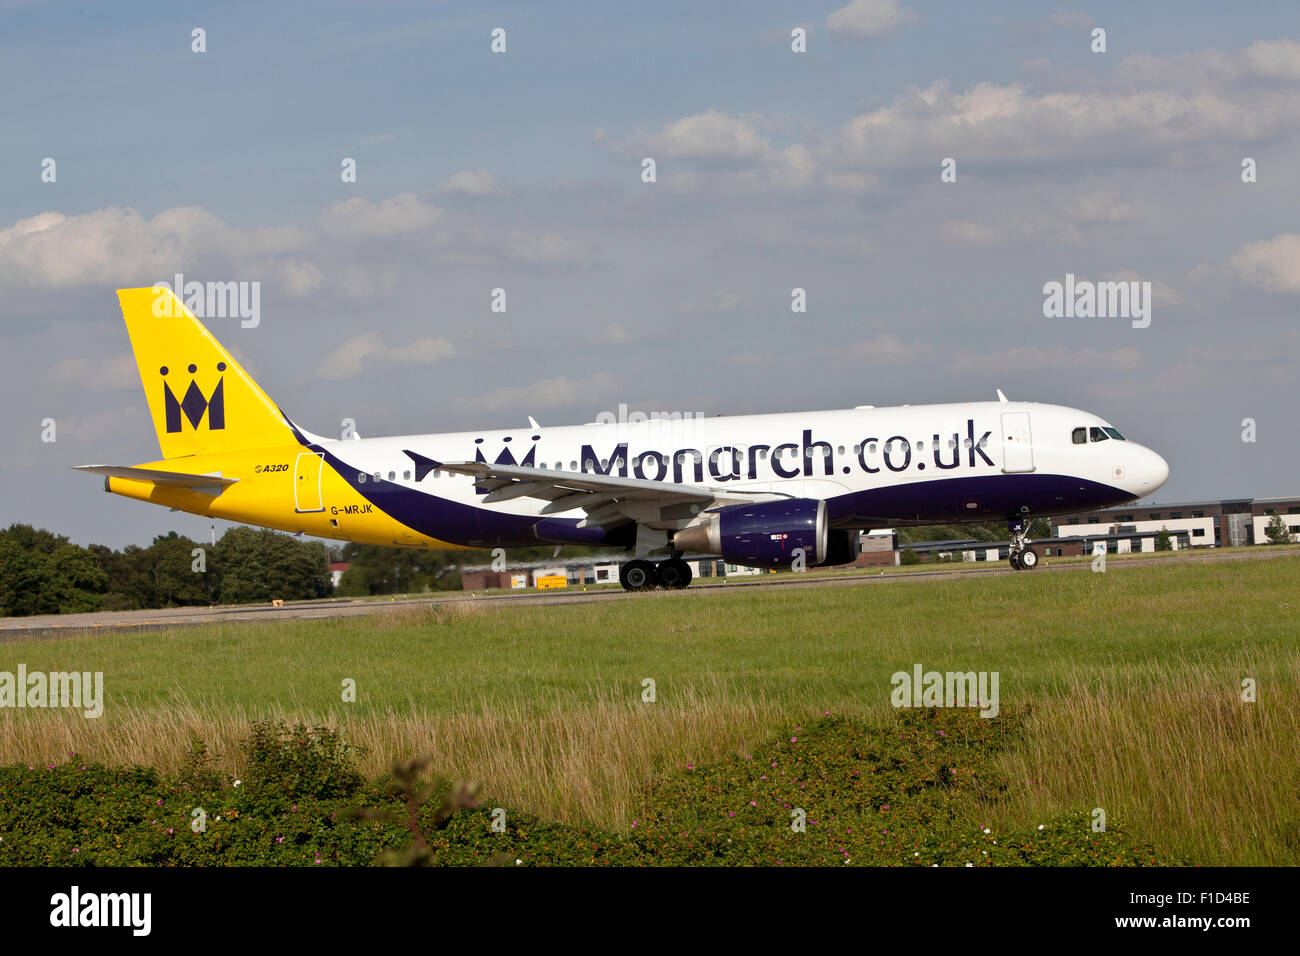 Airbus A320-200 Aeroplane owned by Monarch at Leeds Bradford Airport. Stock Photo